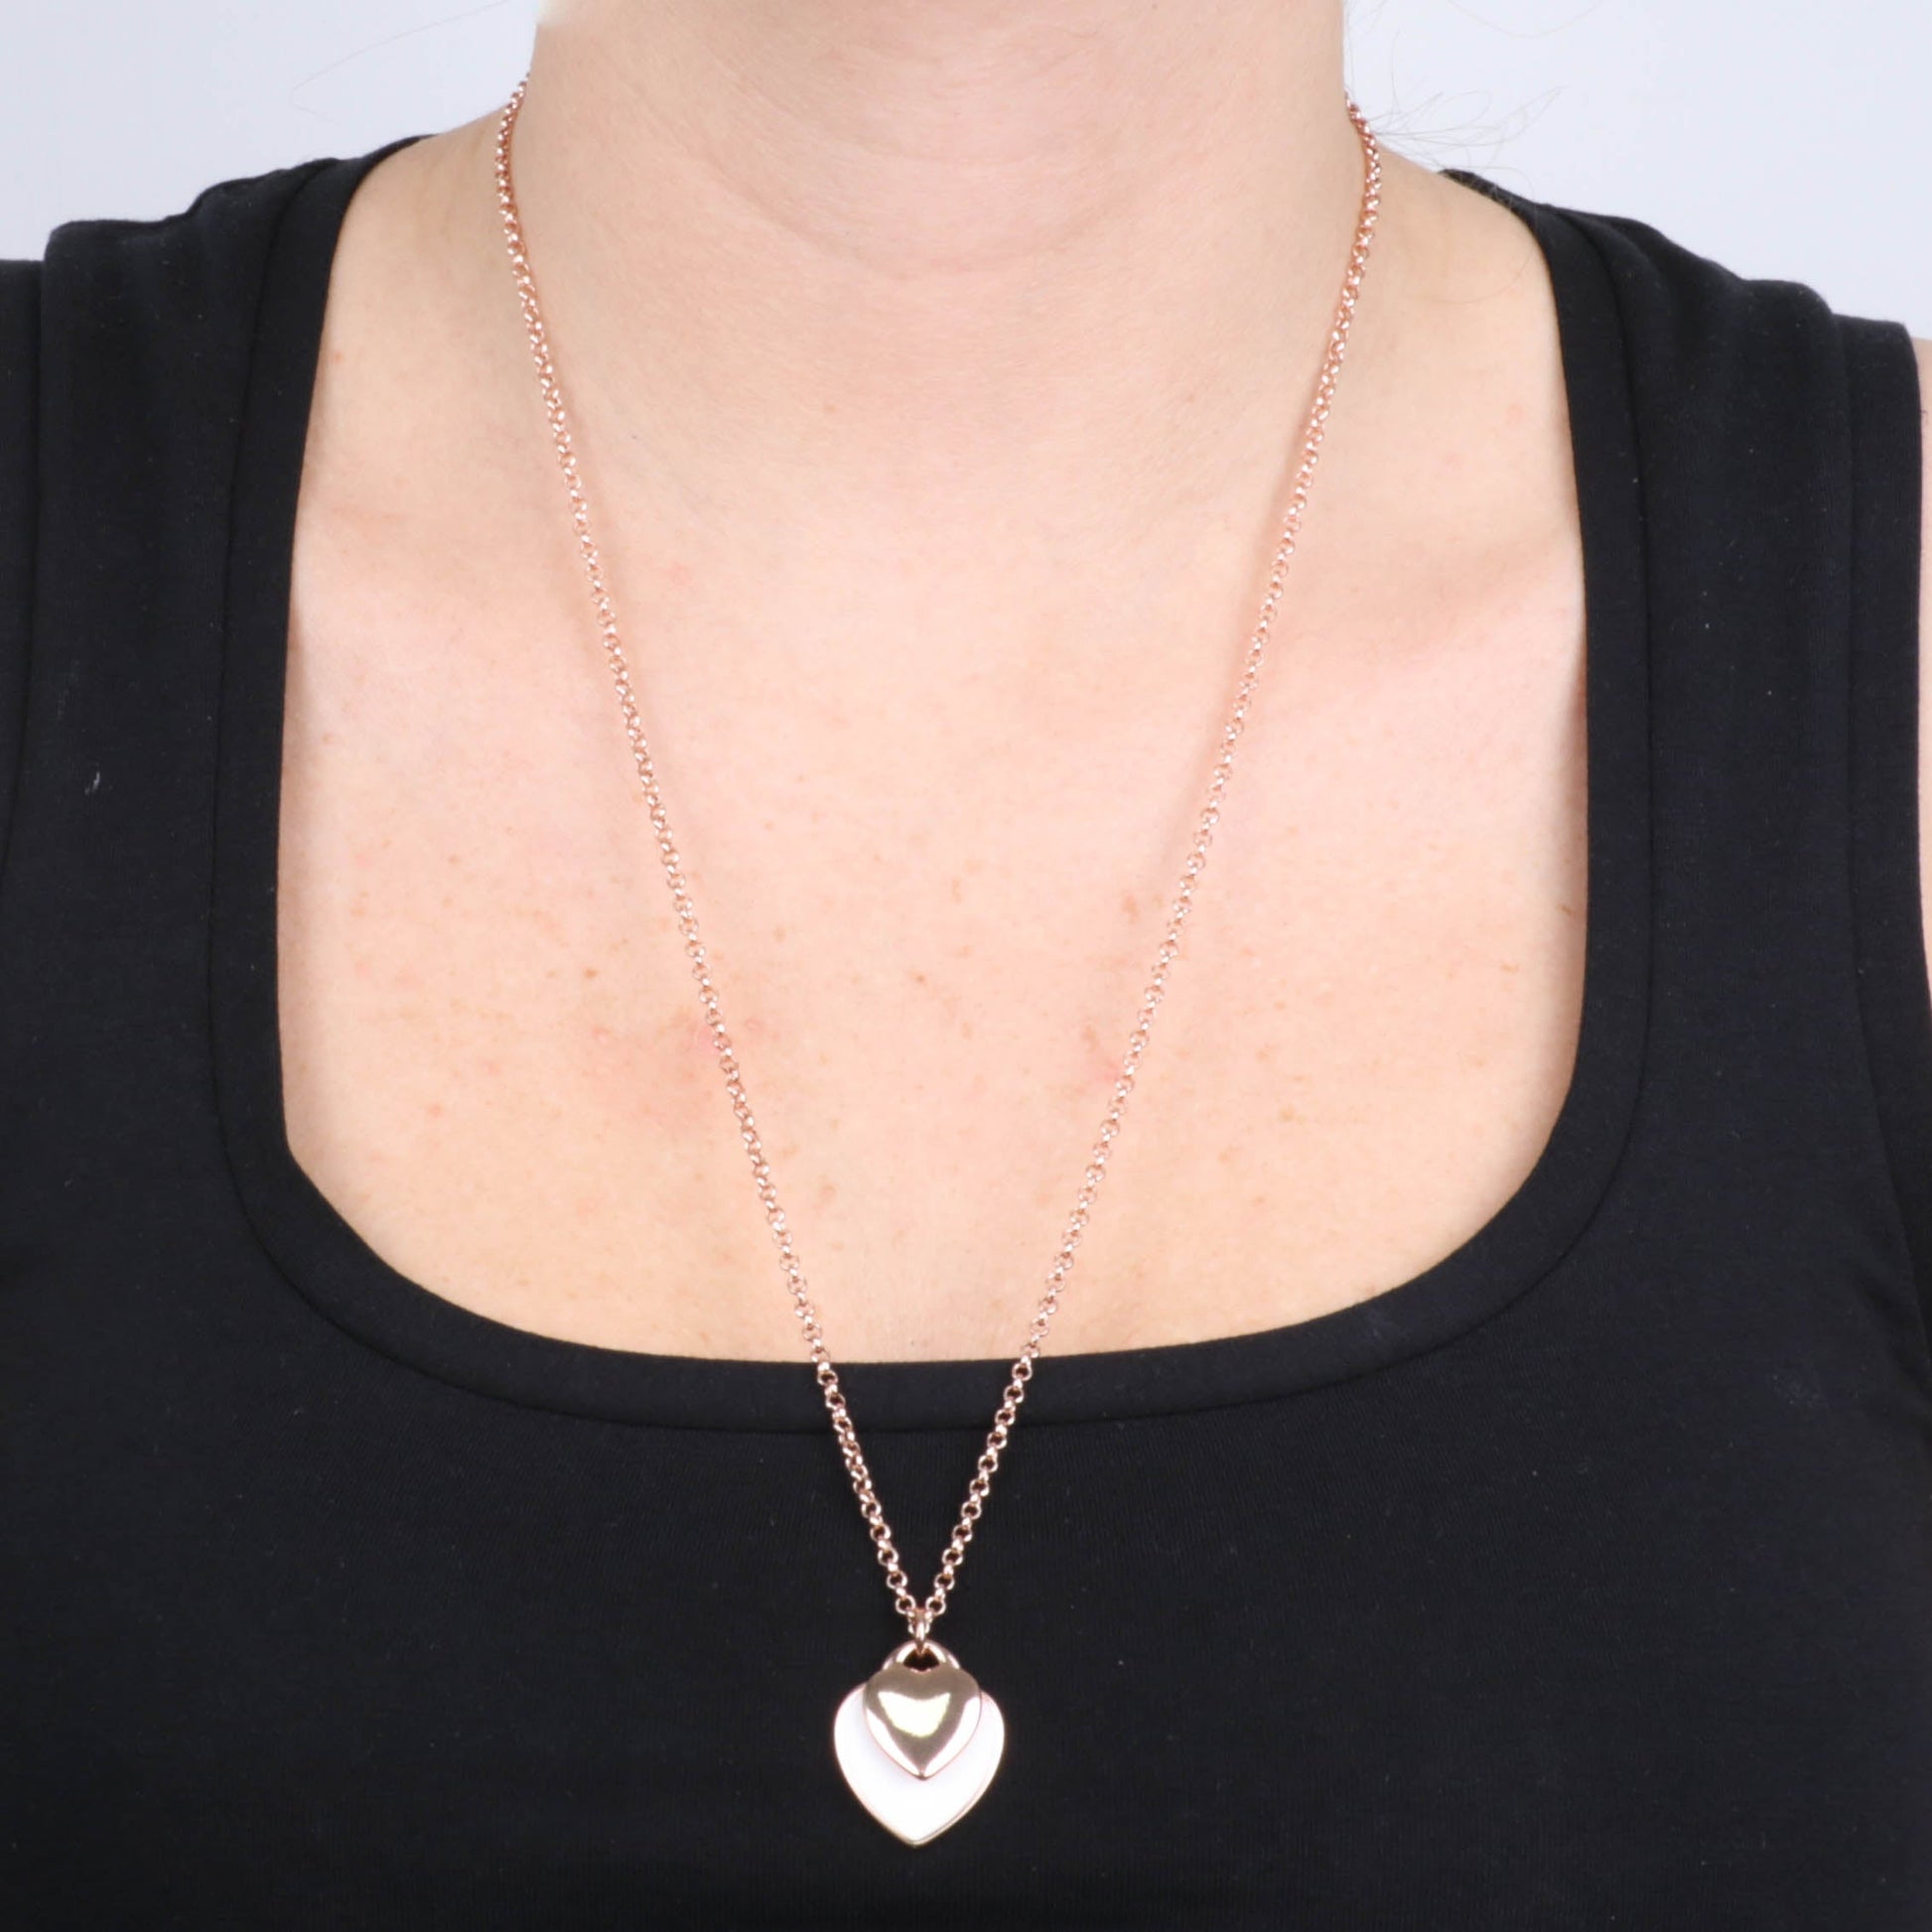 Metal necklace with heart pending in white enamel